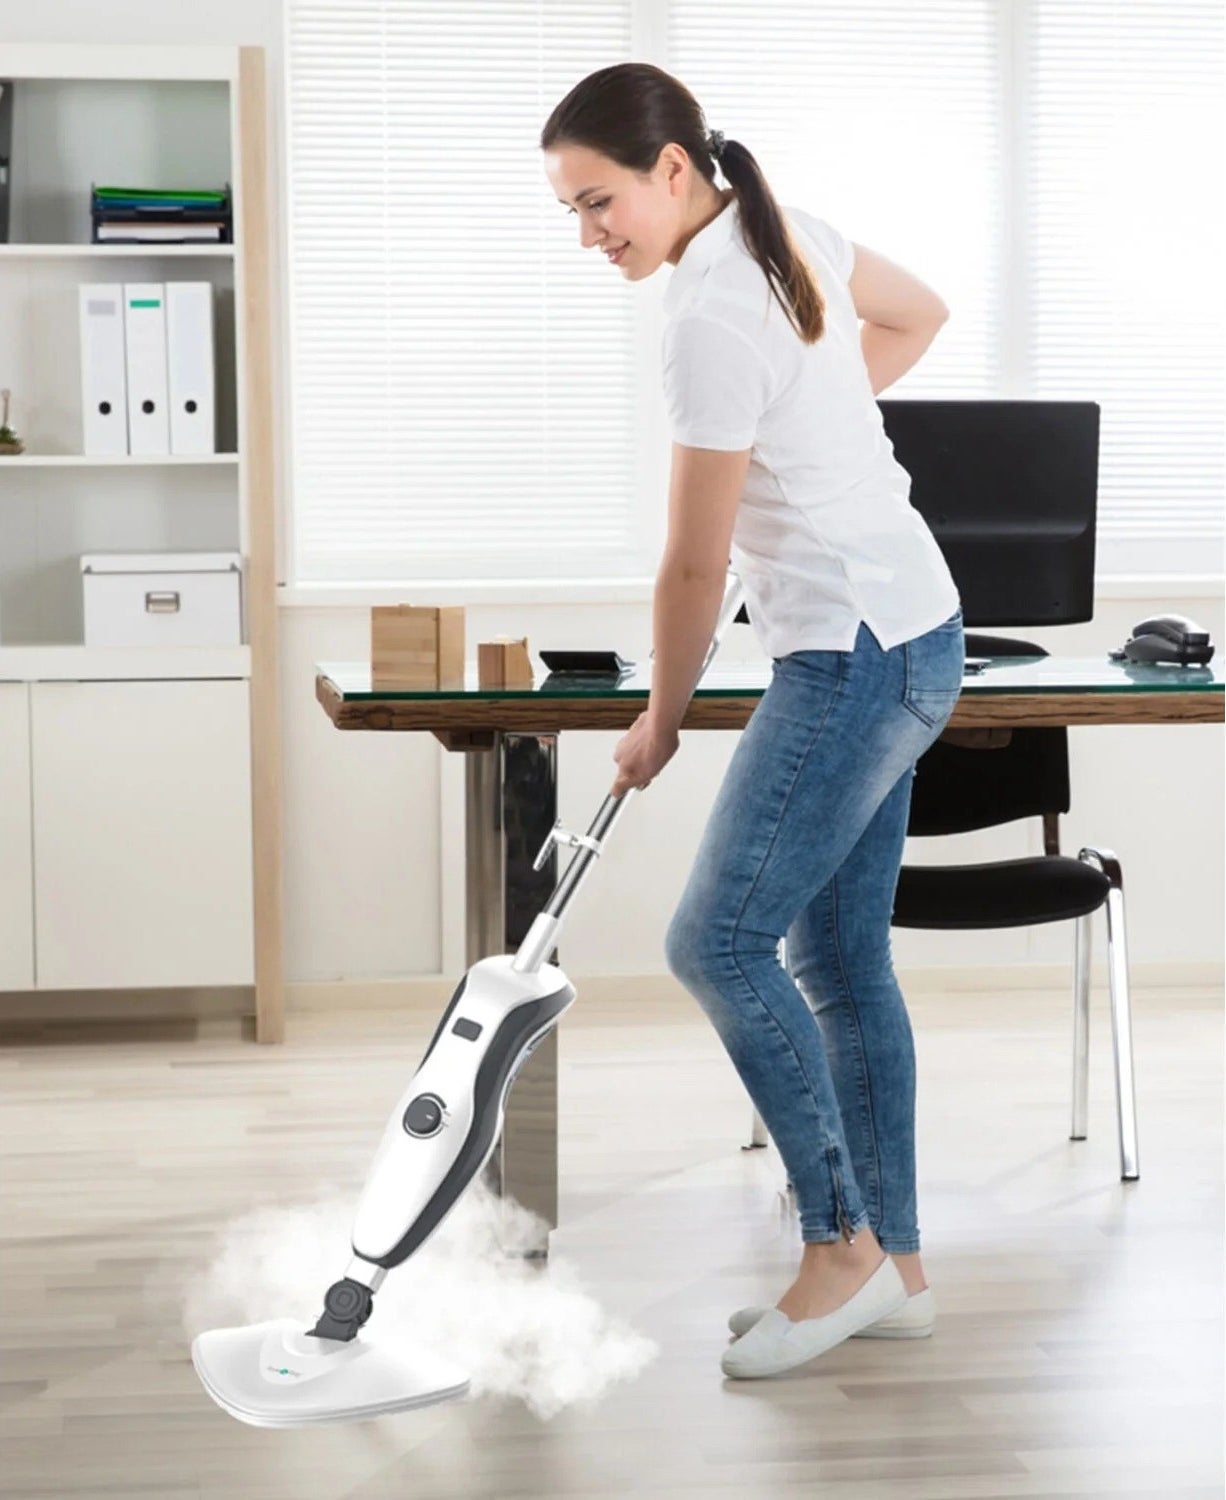 a model using the steam mop to clean the floor